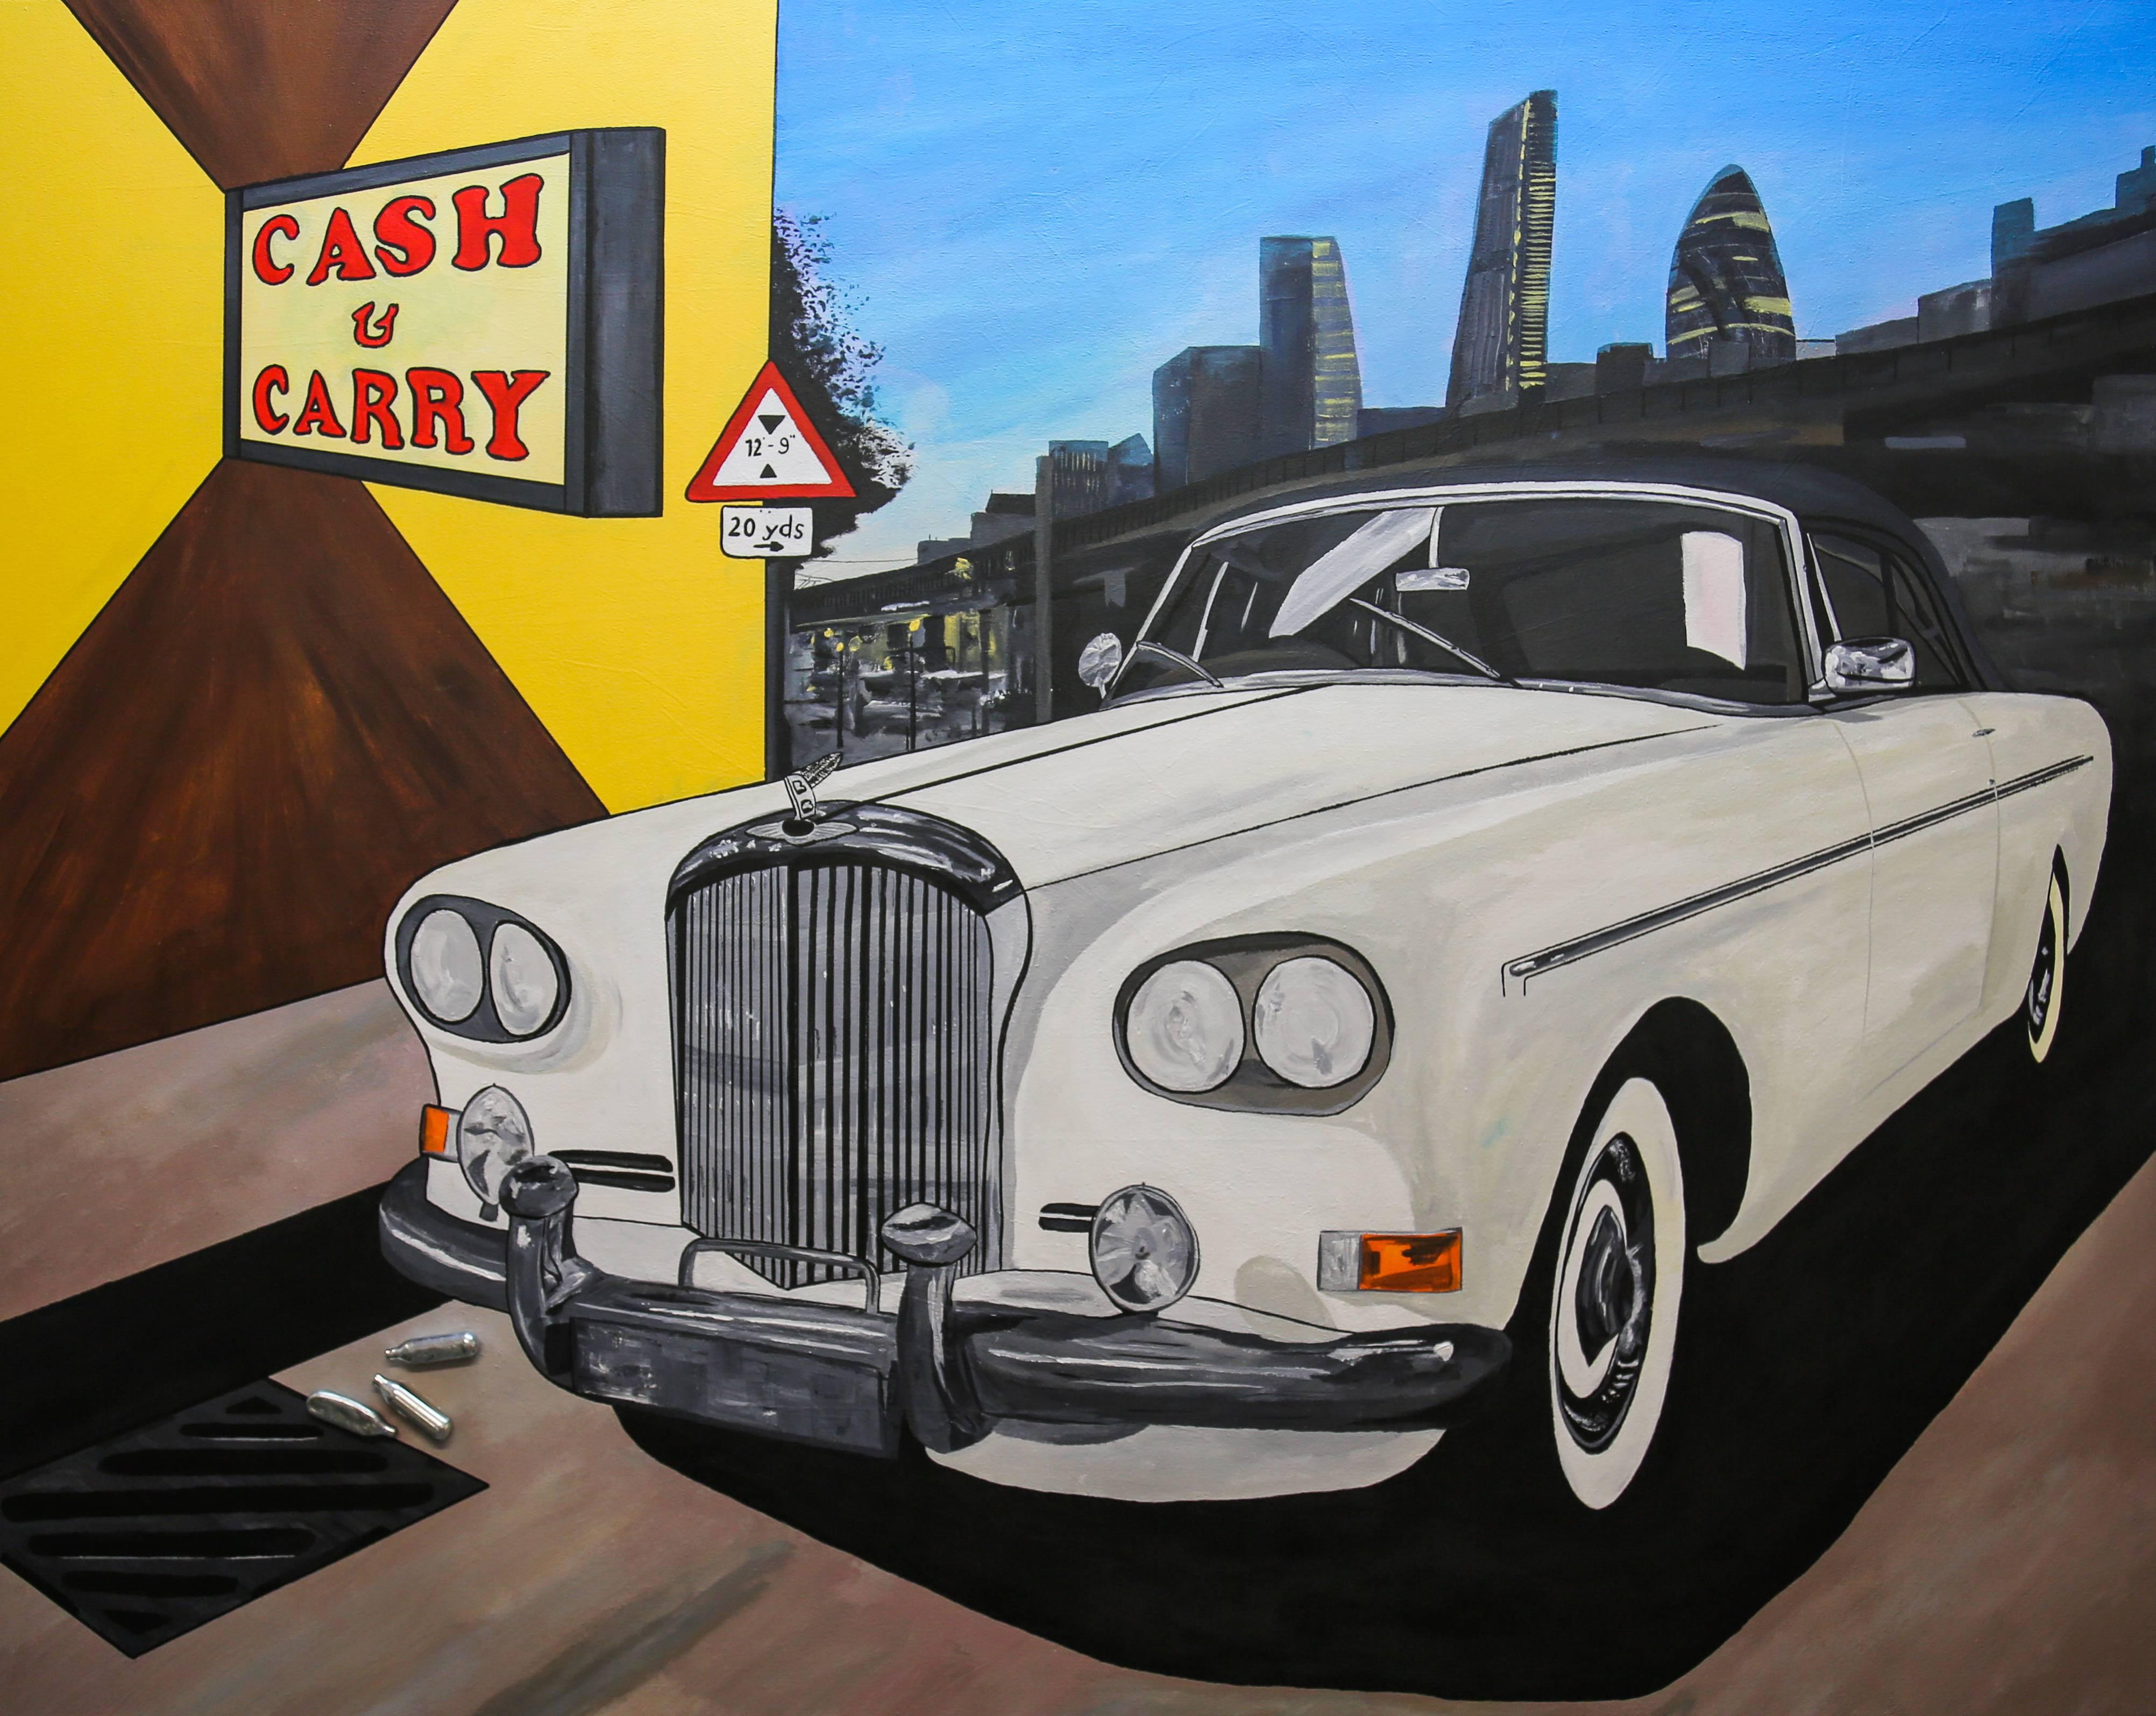 White Bentley Rolling Deep Through the East End, Laughing Gas Original, Signed - Mixed Media Art by Harry Cartwright